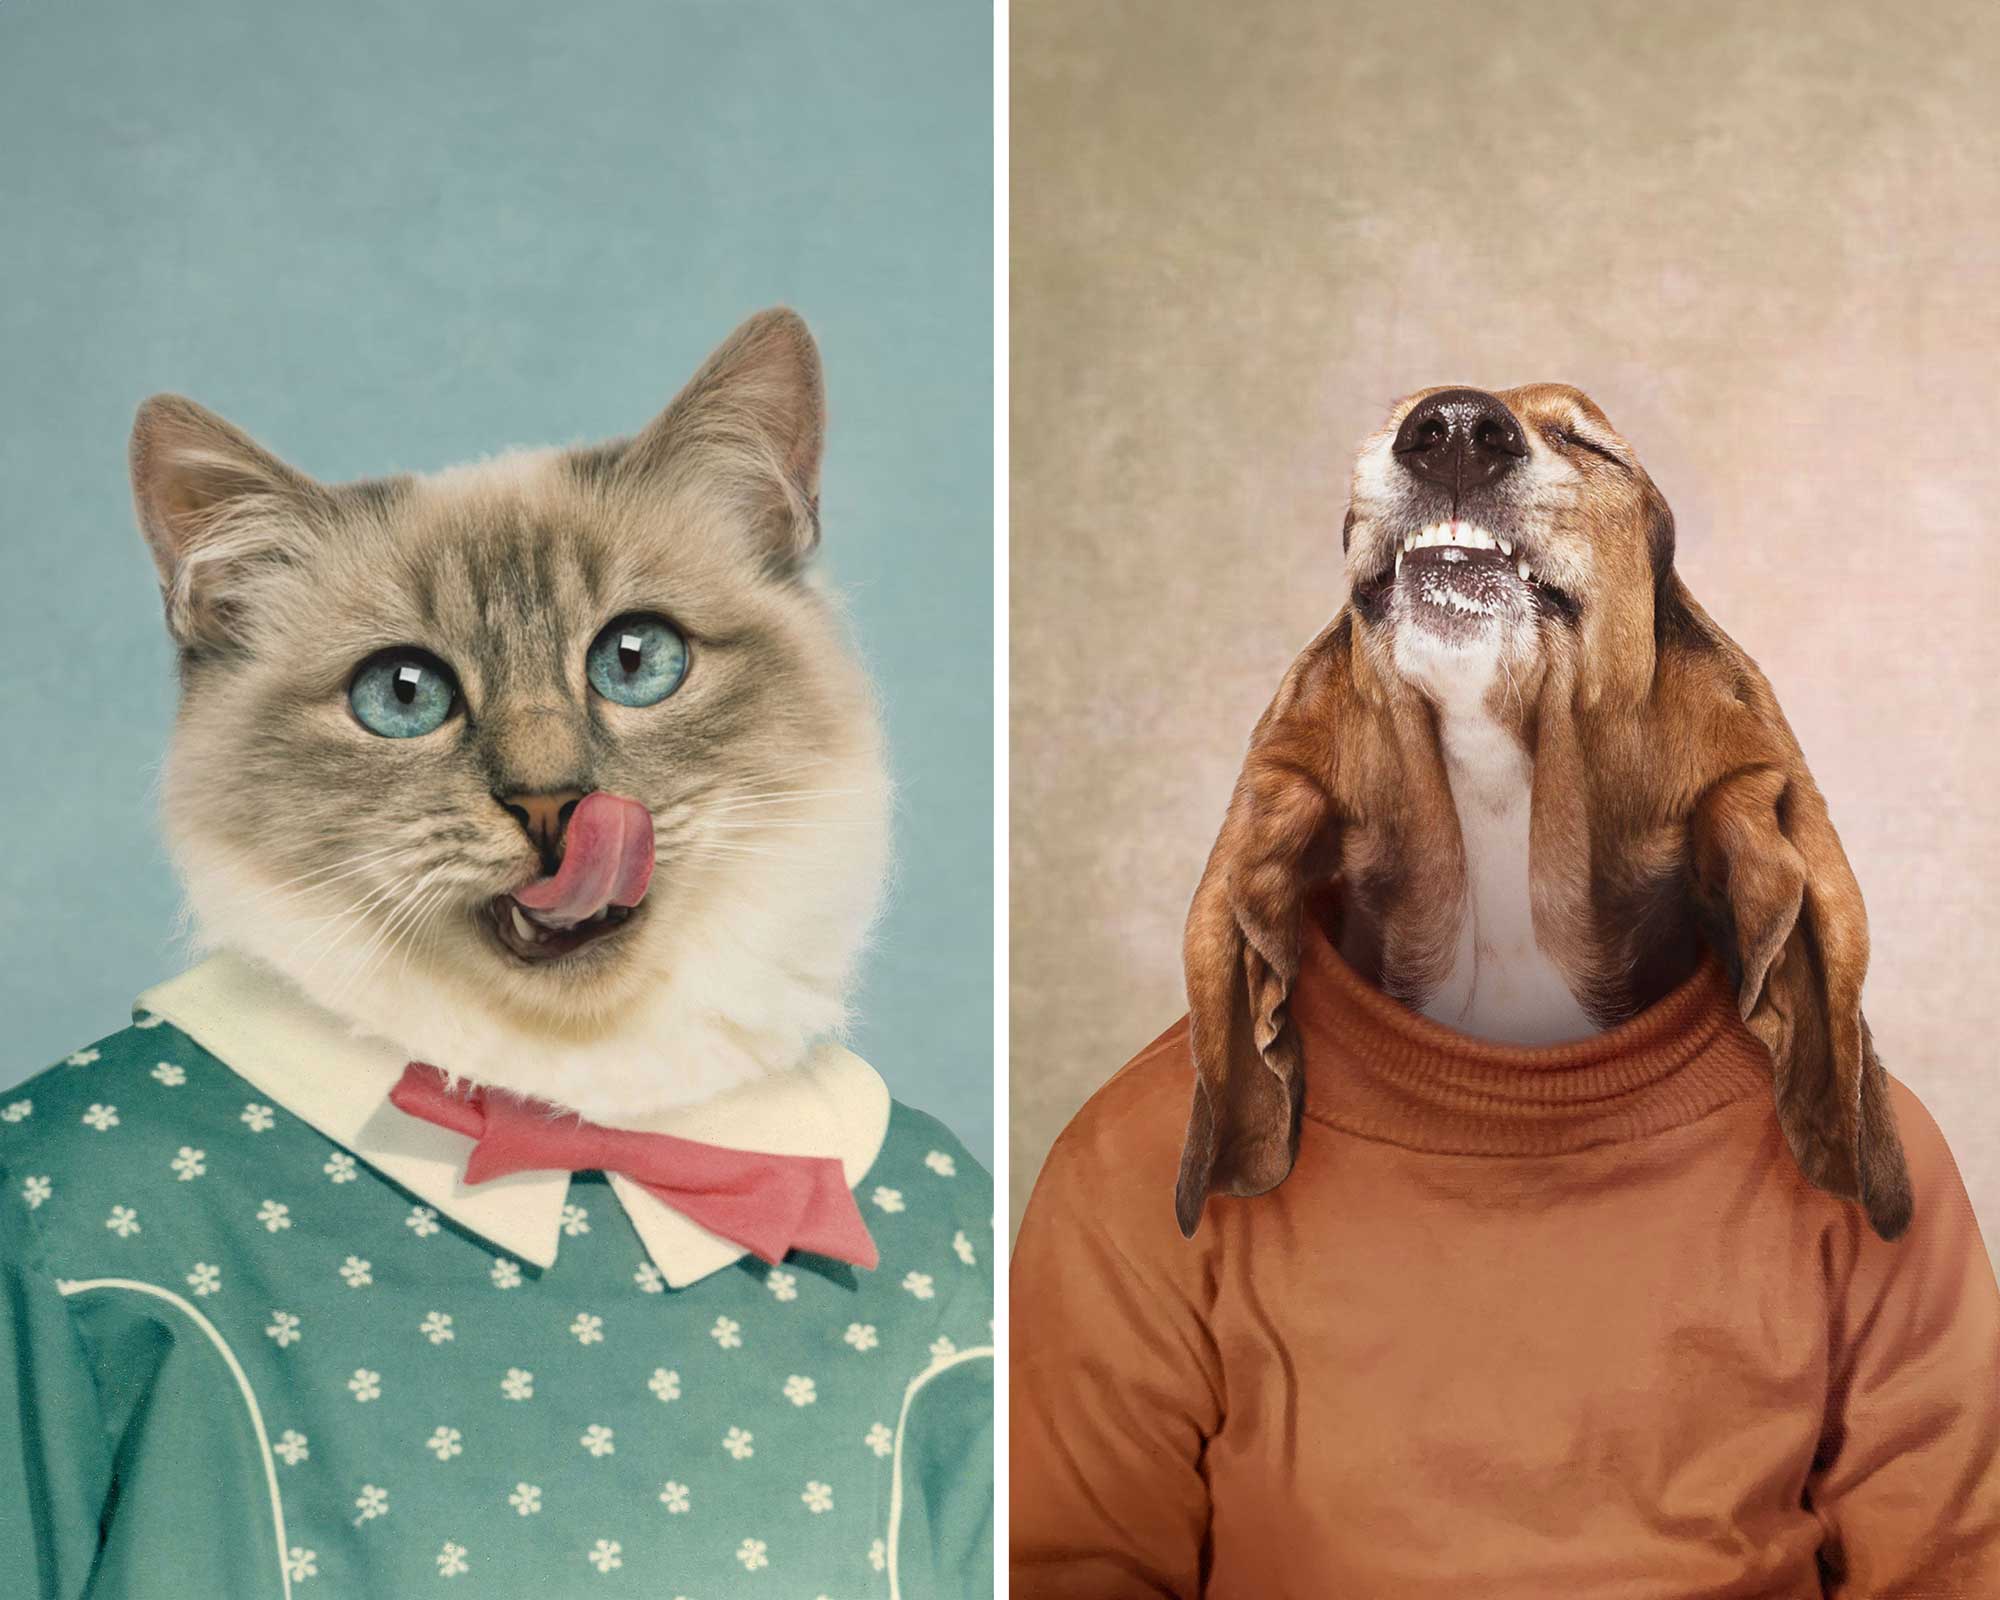 Composite retouching showing a cat and a dog's faces on vintage school portraits.